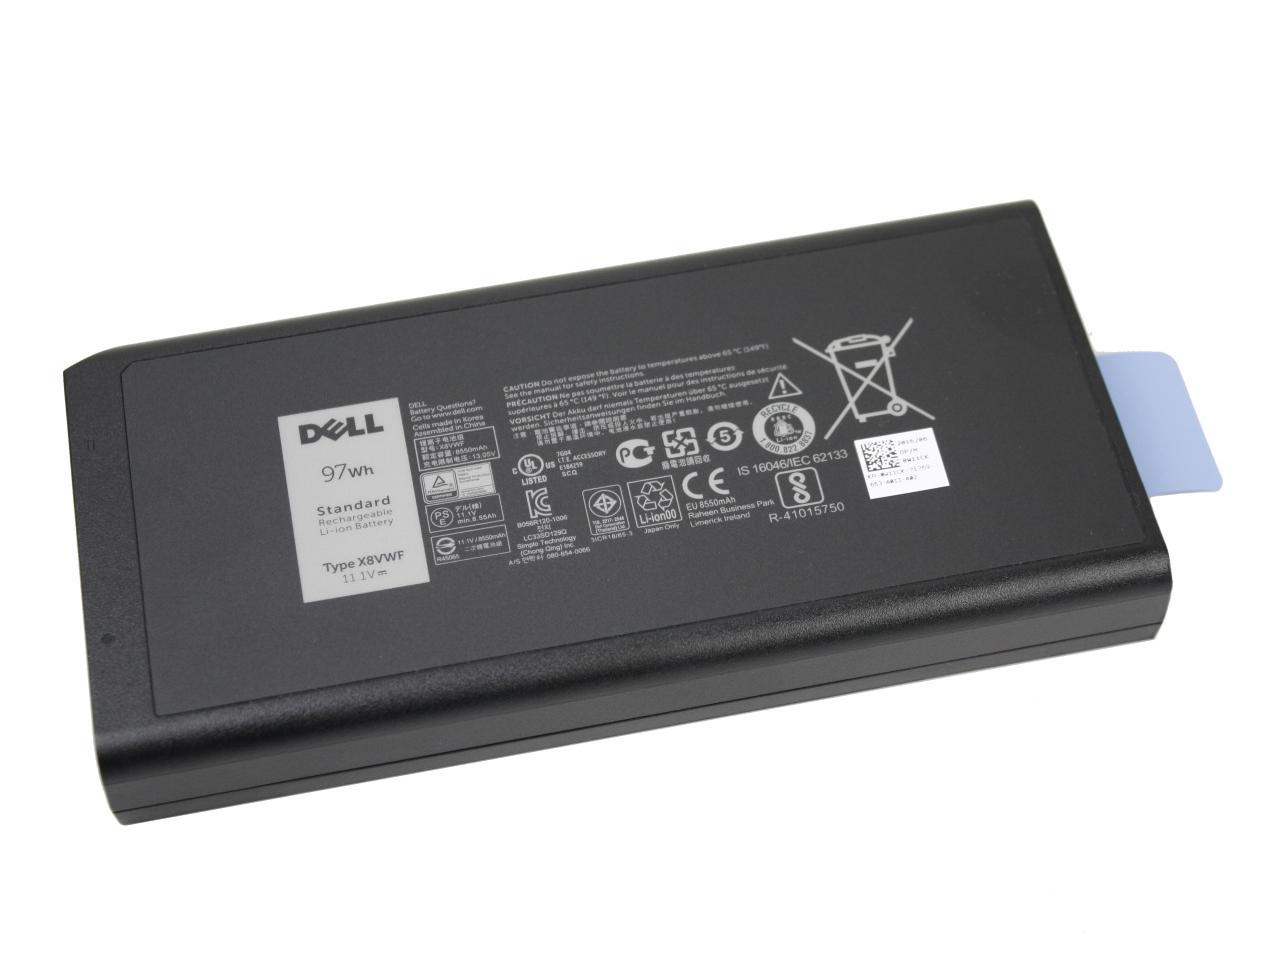 DELL GENUINE BATTERY 9 CELL 97WHR LATITUDE 14 RUGGED EXTREME 5404 5414 7404  7414 7204 451-BBBE X8VWF W11CK 1Y WRTY 